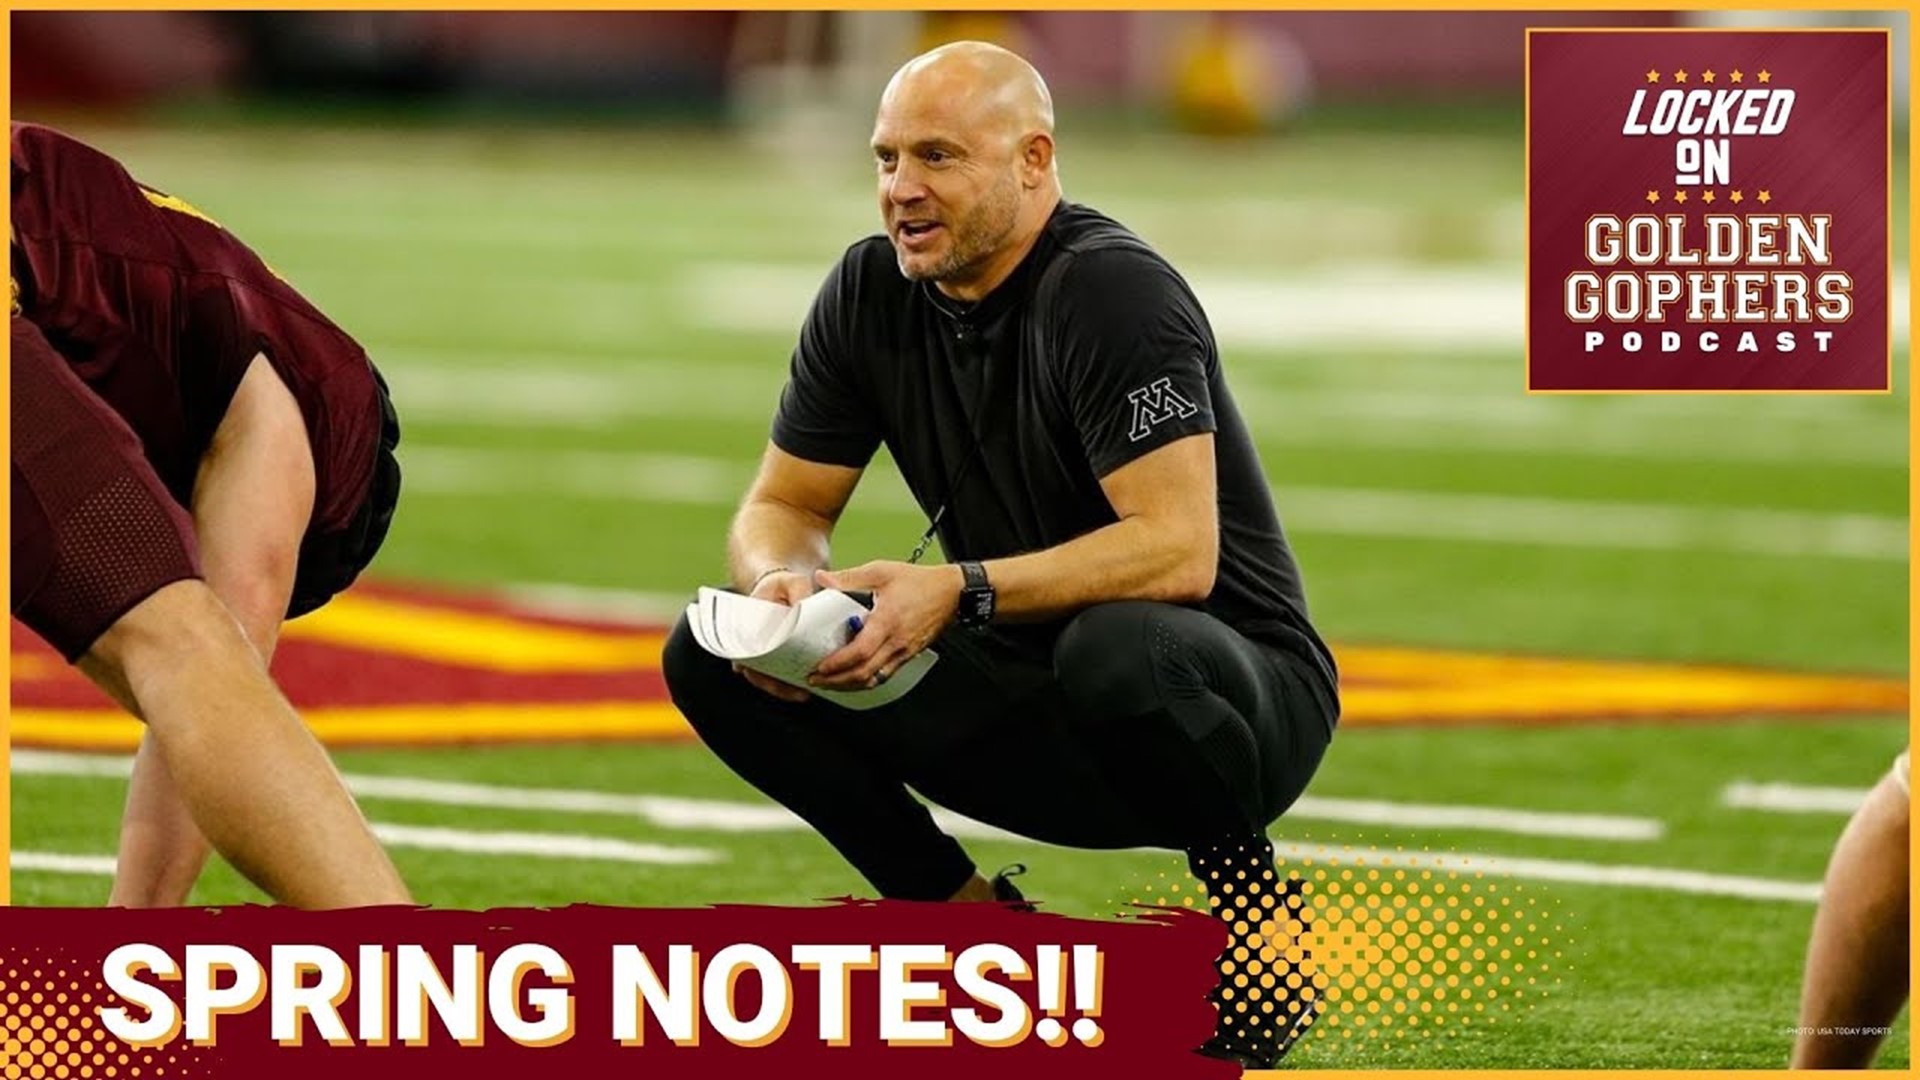 On today's Locked On Golden Gophers, host Kane Rob, discusses how the Minnesota Gophers looked in the Media Only spring practice on 4/16 - new observations thus far.